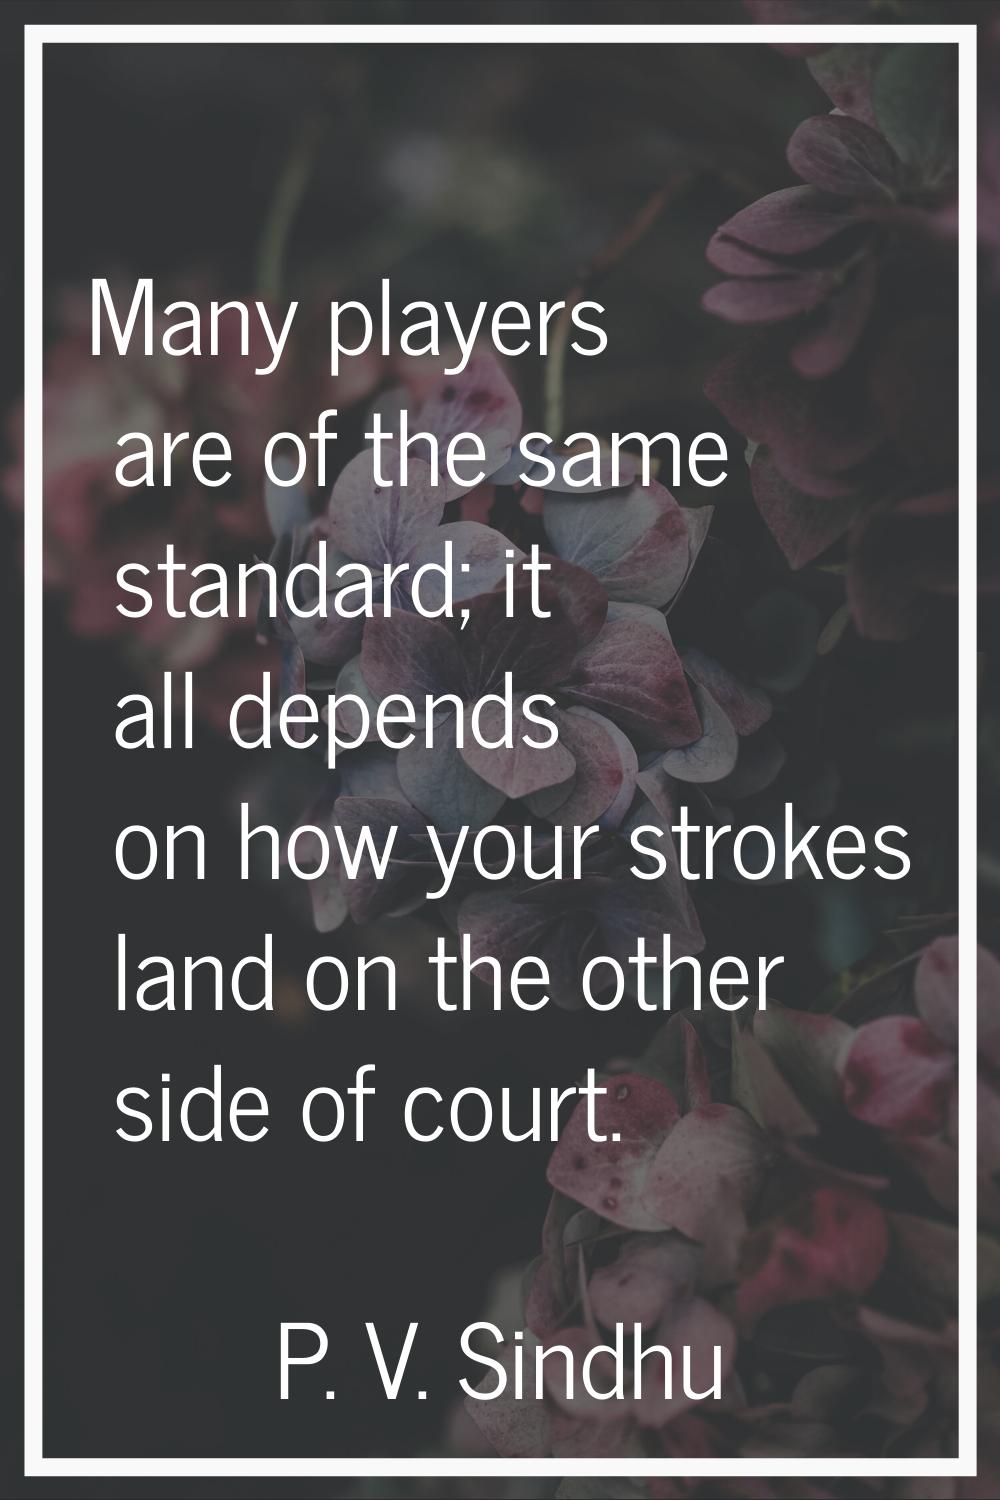 Many players are of the same standard; it all depends on how your strokes land on the other side of